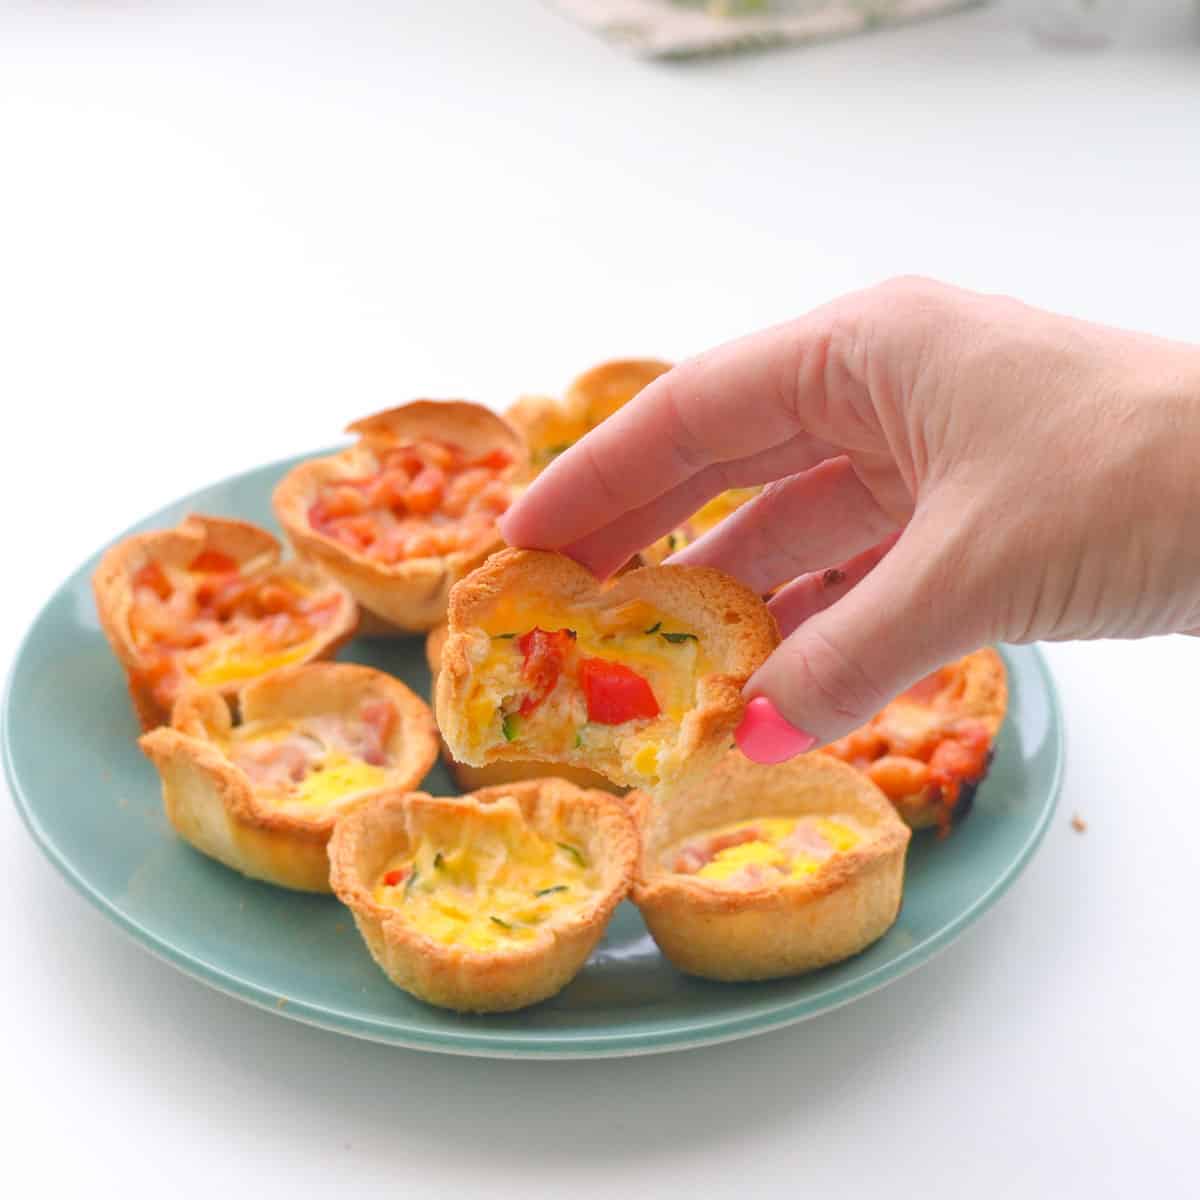 A turquoise plate filled with mini quiches with different fillings with one cut in half to show the inside.